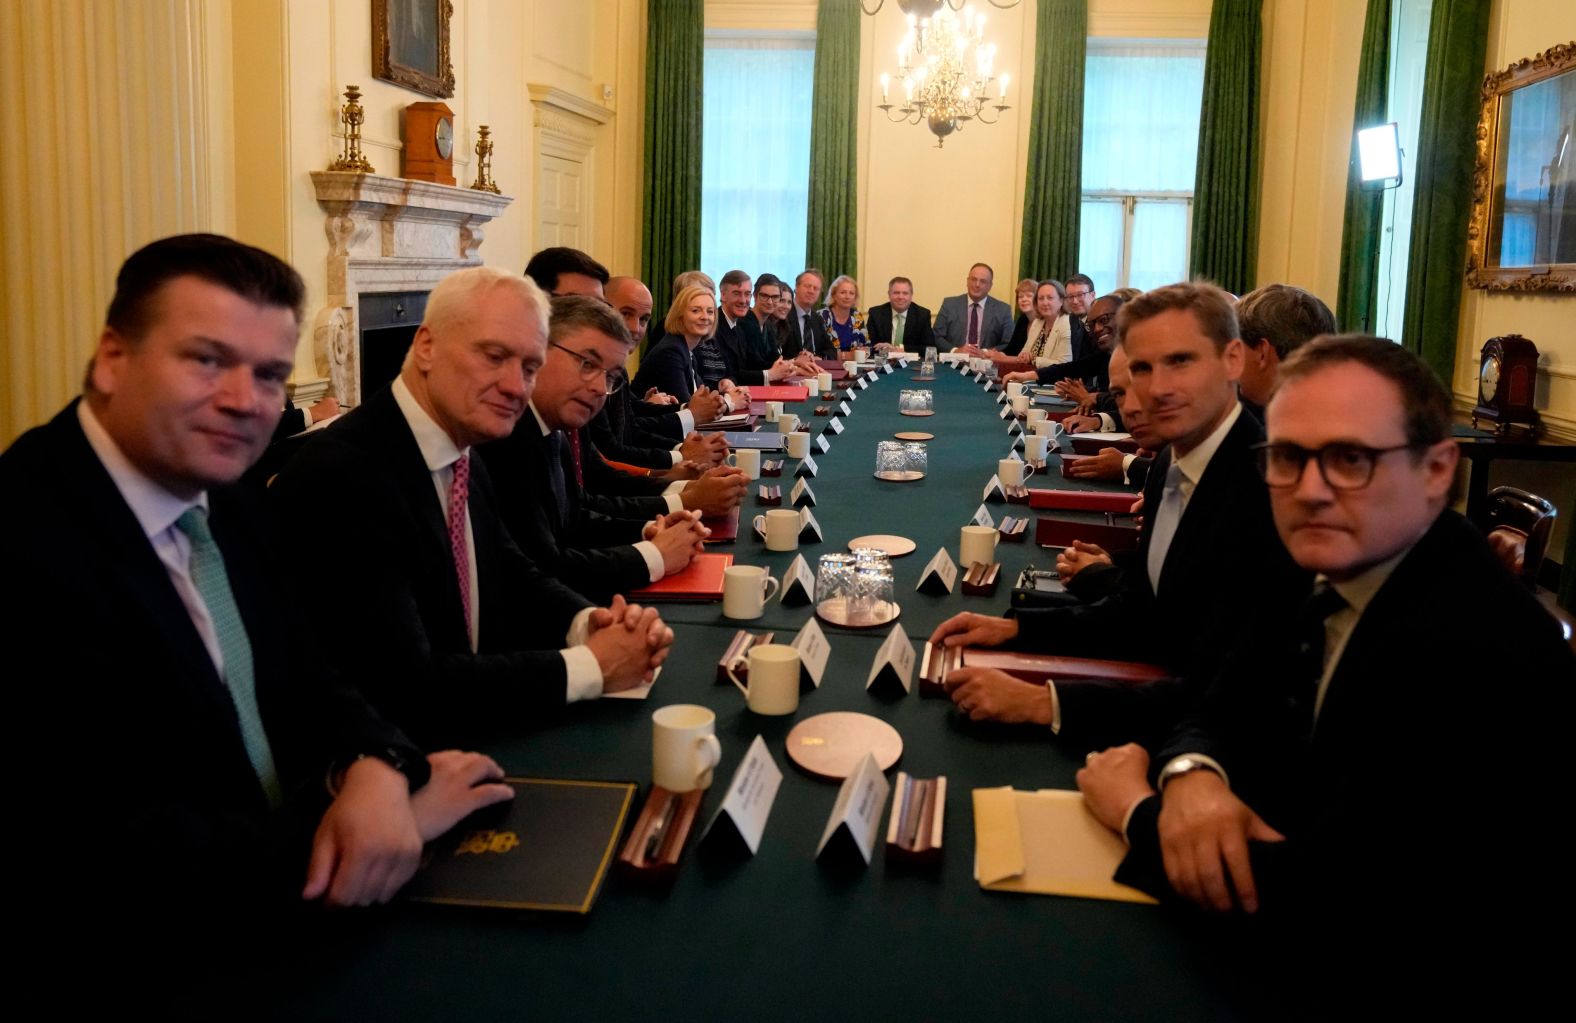 Truss holds her first cabinet meeting inside No. 10 Downing Street. Truss has assembled <a href="index.php?page=&url=https%3A%2F%2Fwww.cnn.com%2F2022%2F09%2F07%2Fuk%2Fliz-truss-diverse-cabinet-uk-gbr-intl%2Findex.html" target="_blank">the most ethnically diverse Cabinet</a> in the United Kingdom's history, with several top jobs given to Black and other minority ethnic lawmakers.